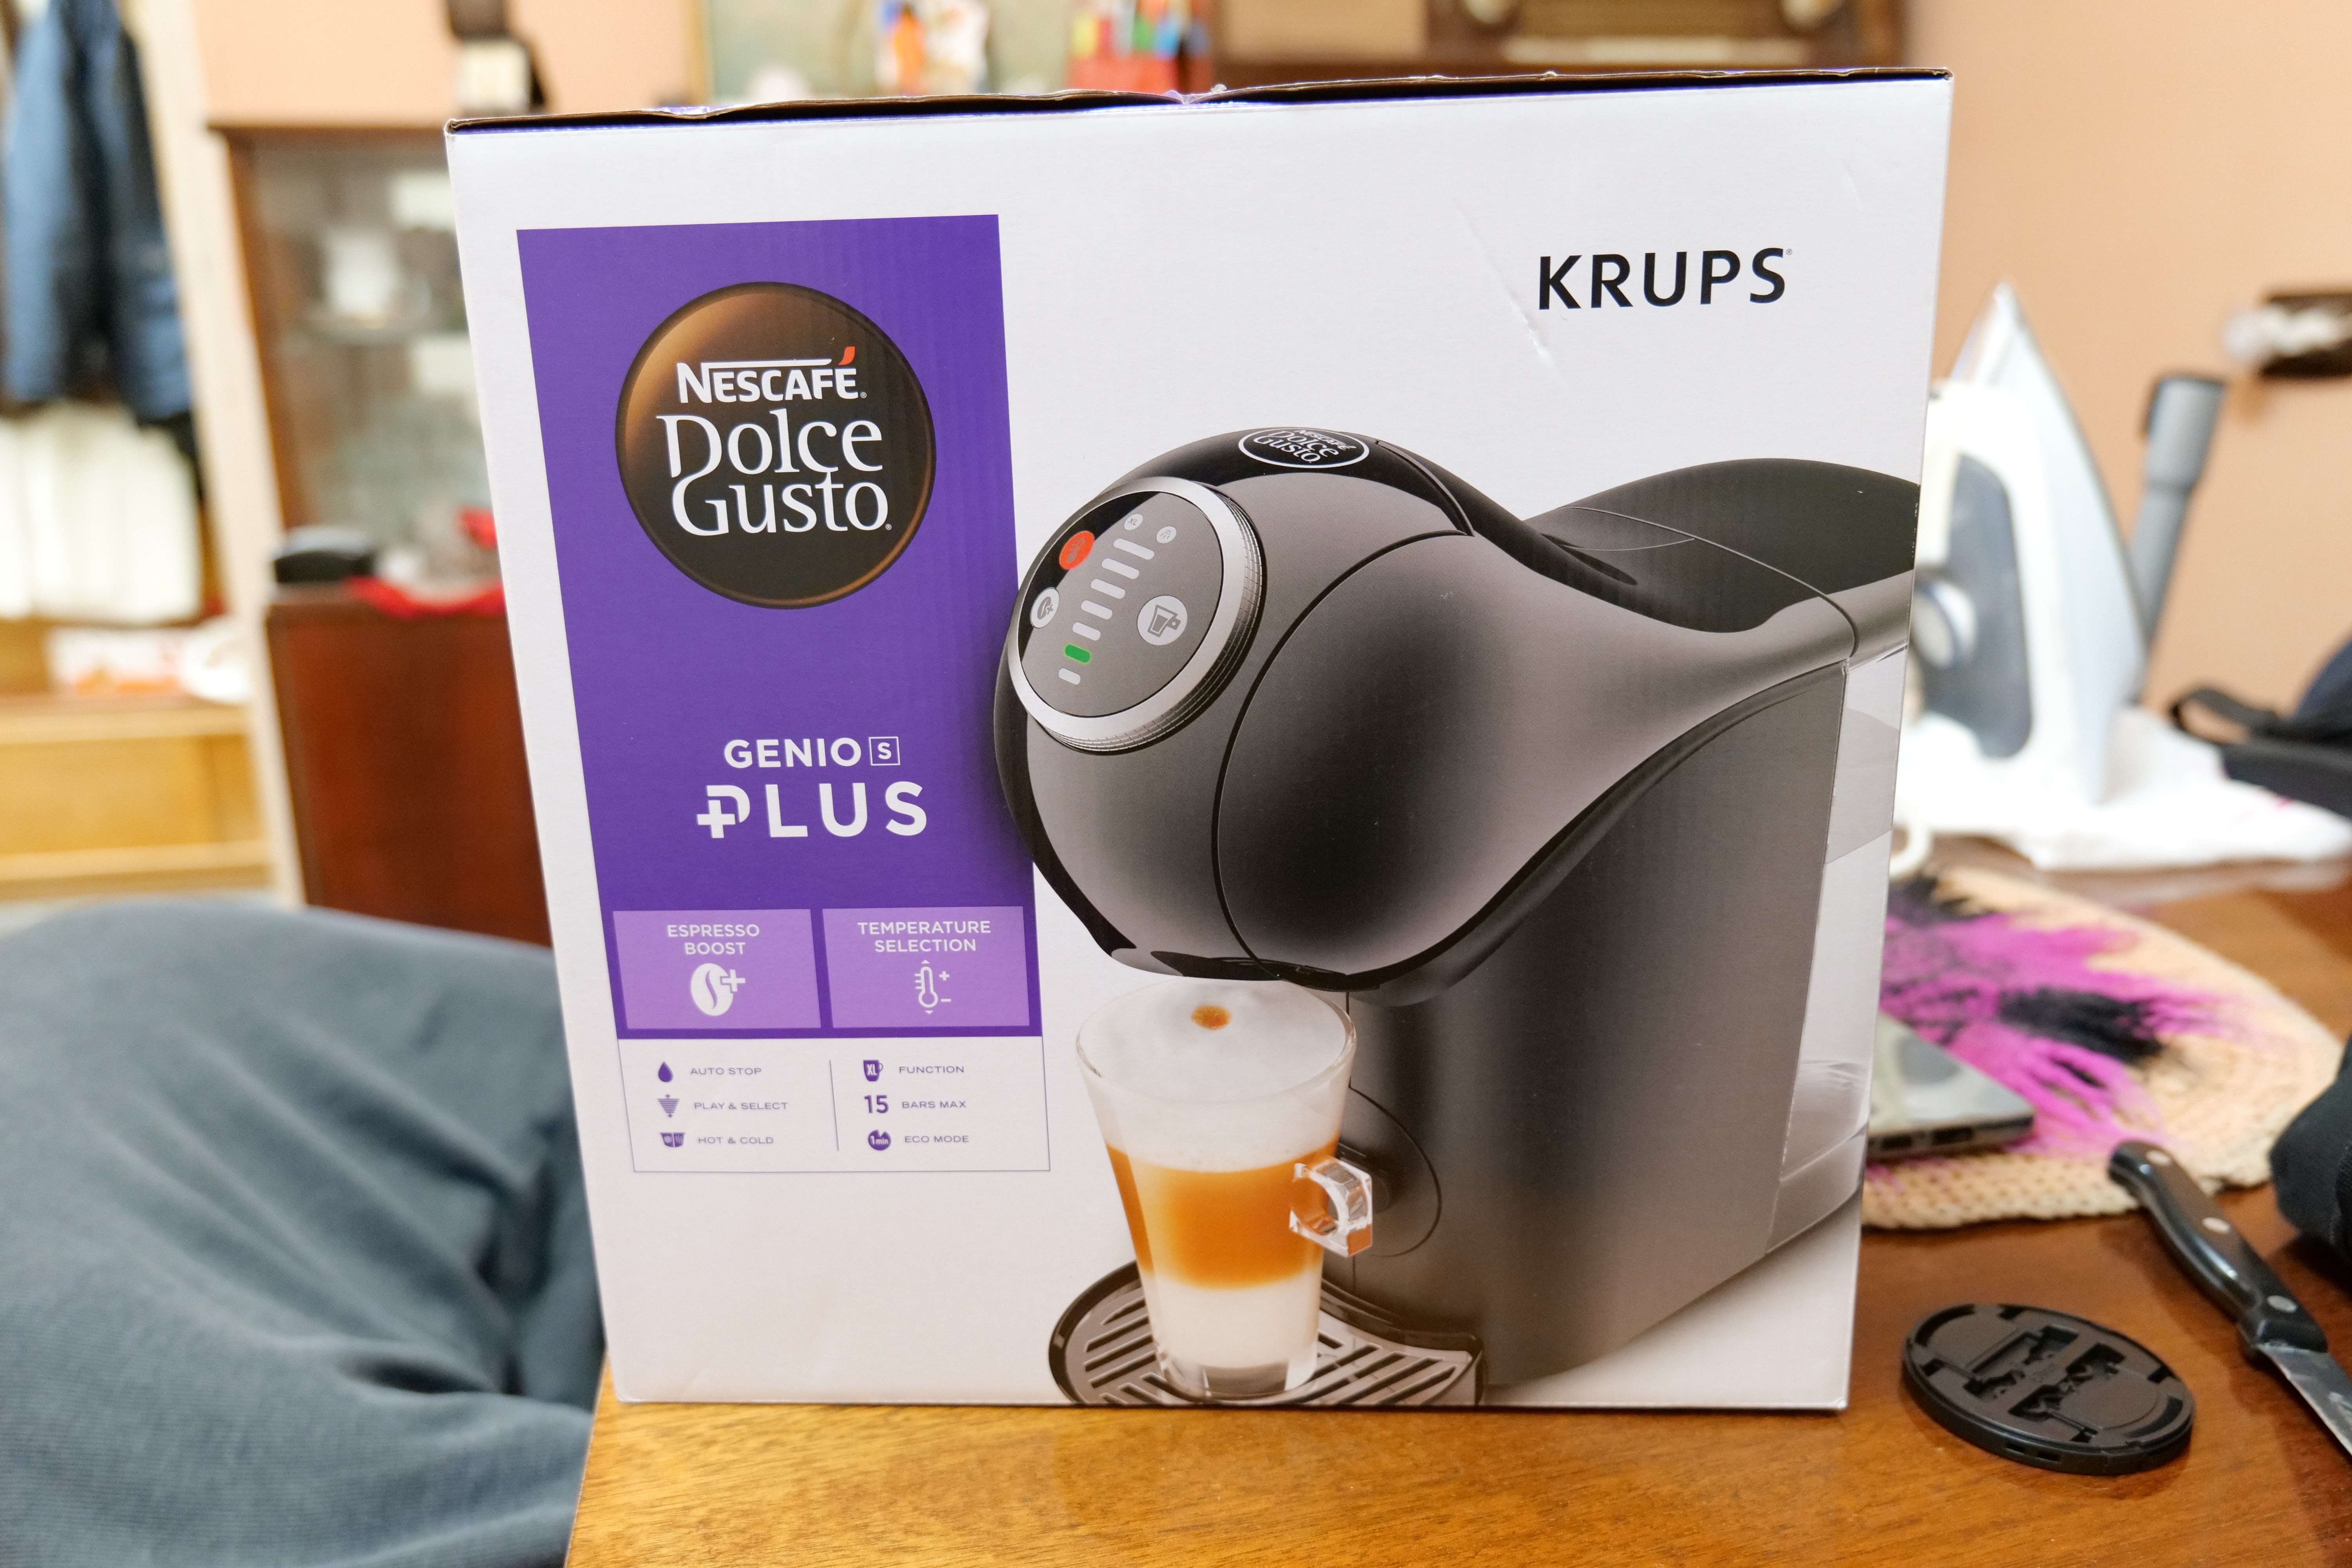 What do we know about the KRUPS GENIO S PLUS KP3408 automatic